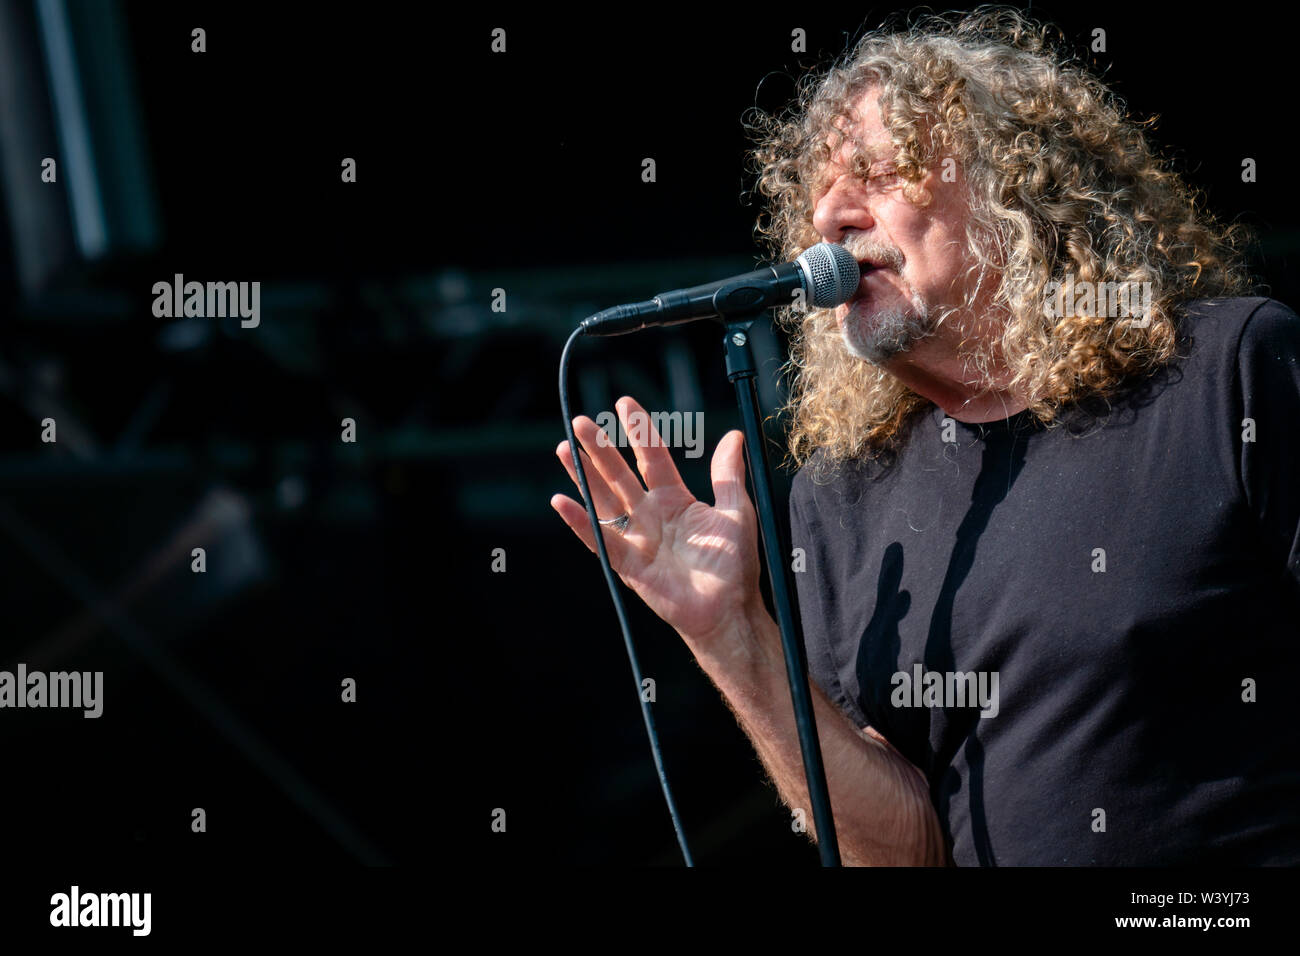 Bergen, Norway - June 15th, 2019. Robert Plant and the Sensational Space  Shifters perform a live concert during the Norwegian music festival  Bergenfest 2019 in Bergen. Here singer and songwriter Robert Plant